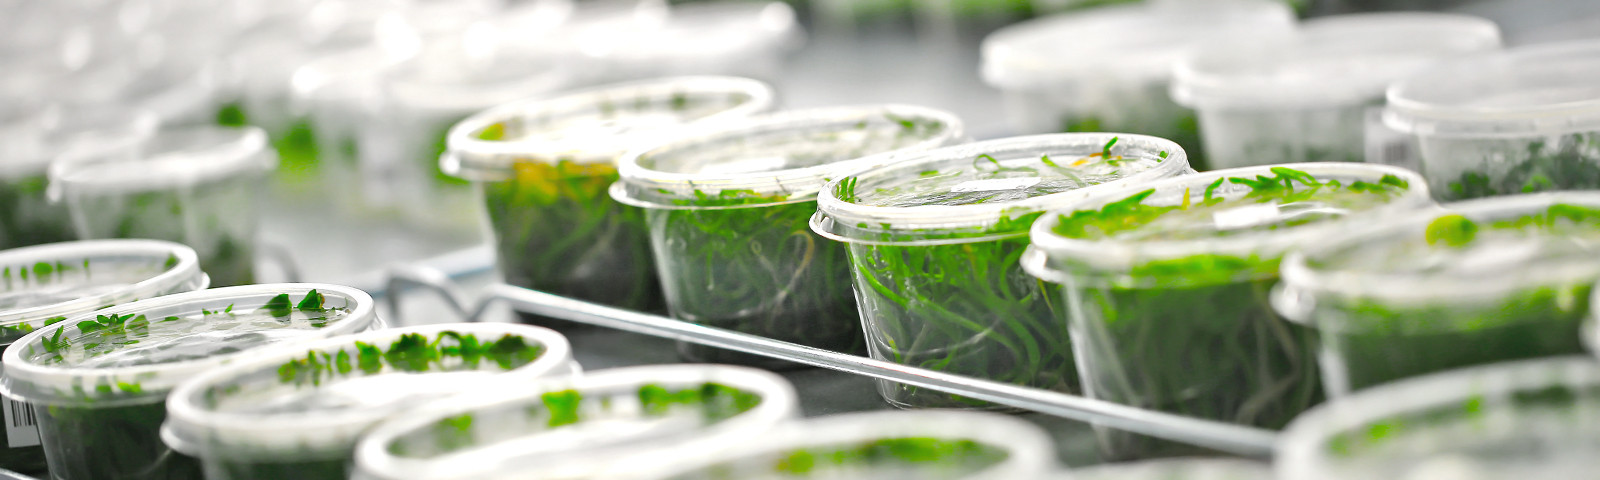 Shipping and storage of in-vitro plants - Aquascaping Wiki Aquasabi